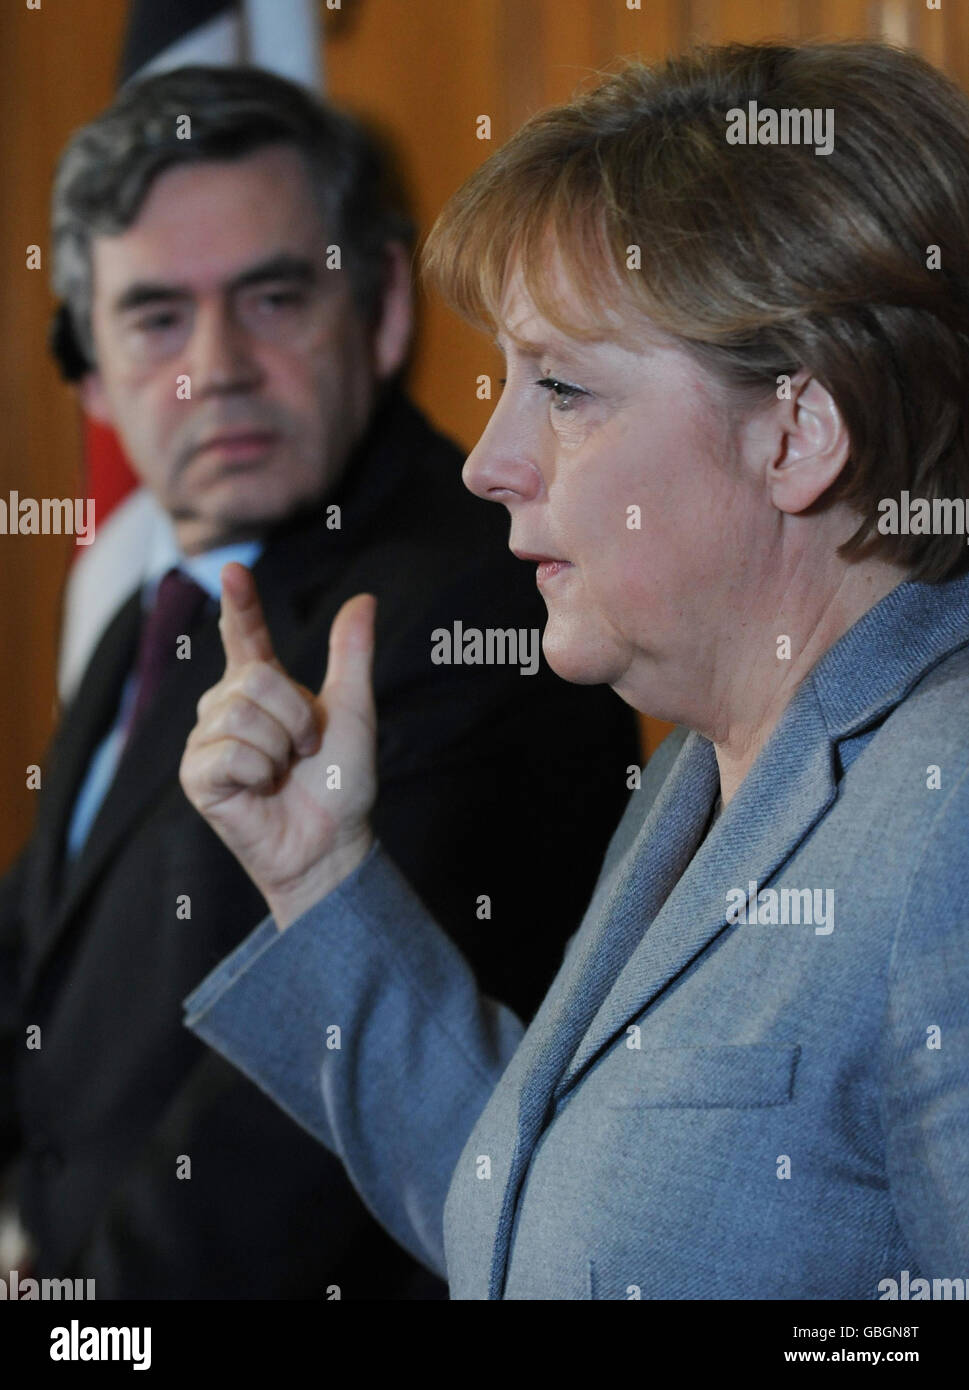 Prime Minister Gordon Brown with German Chancellor Angela Merkel during a press conference in 10 Downing St, central London. Stock Photo